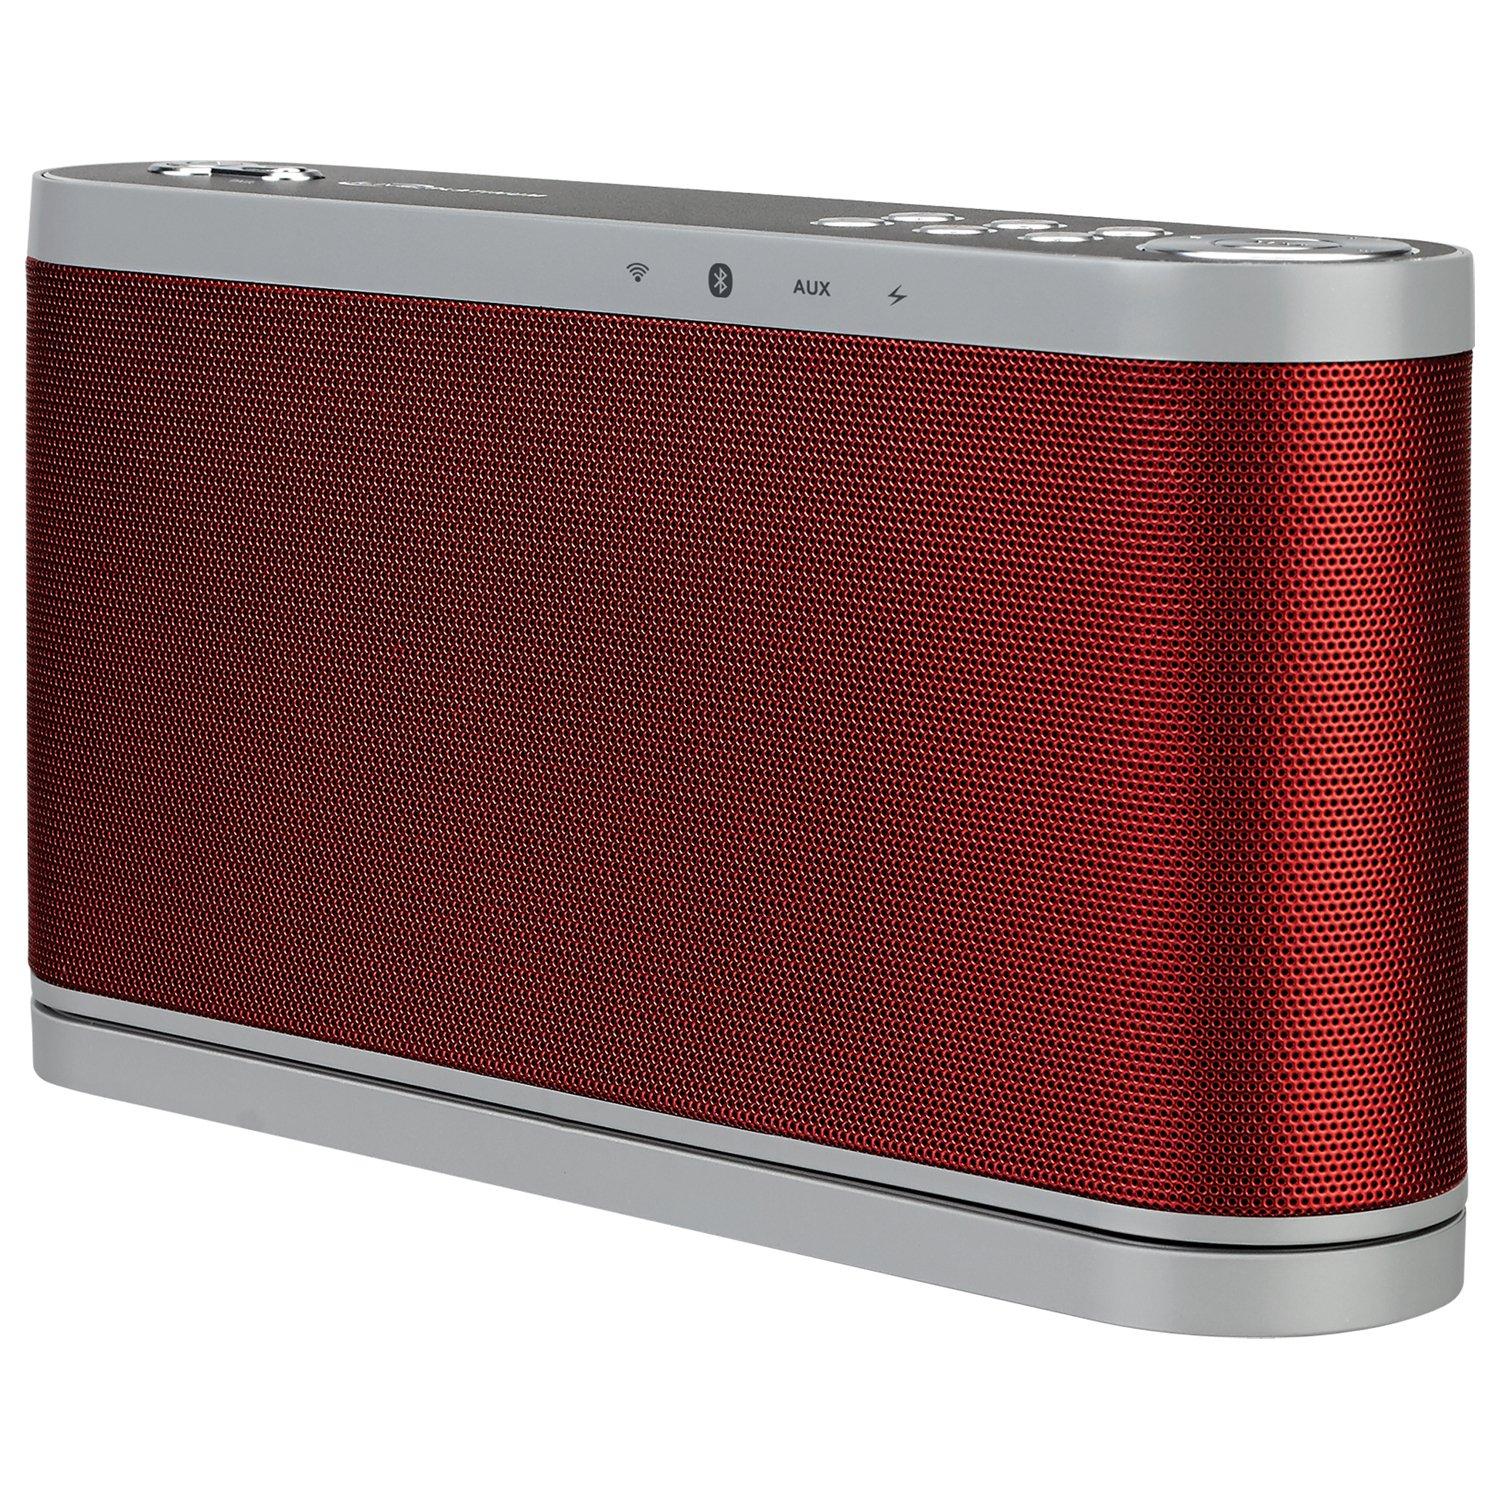 iLive Platinum Wi-Fi Bluetooth Speaker with Charging Base, Red GameStop